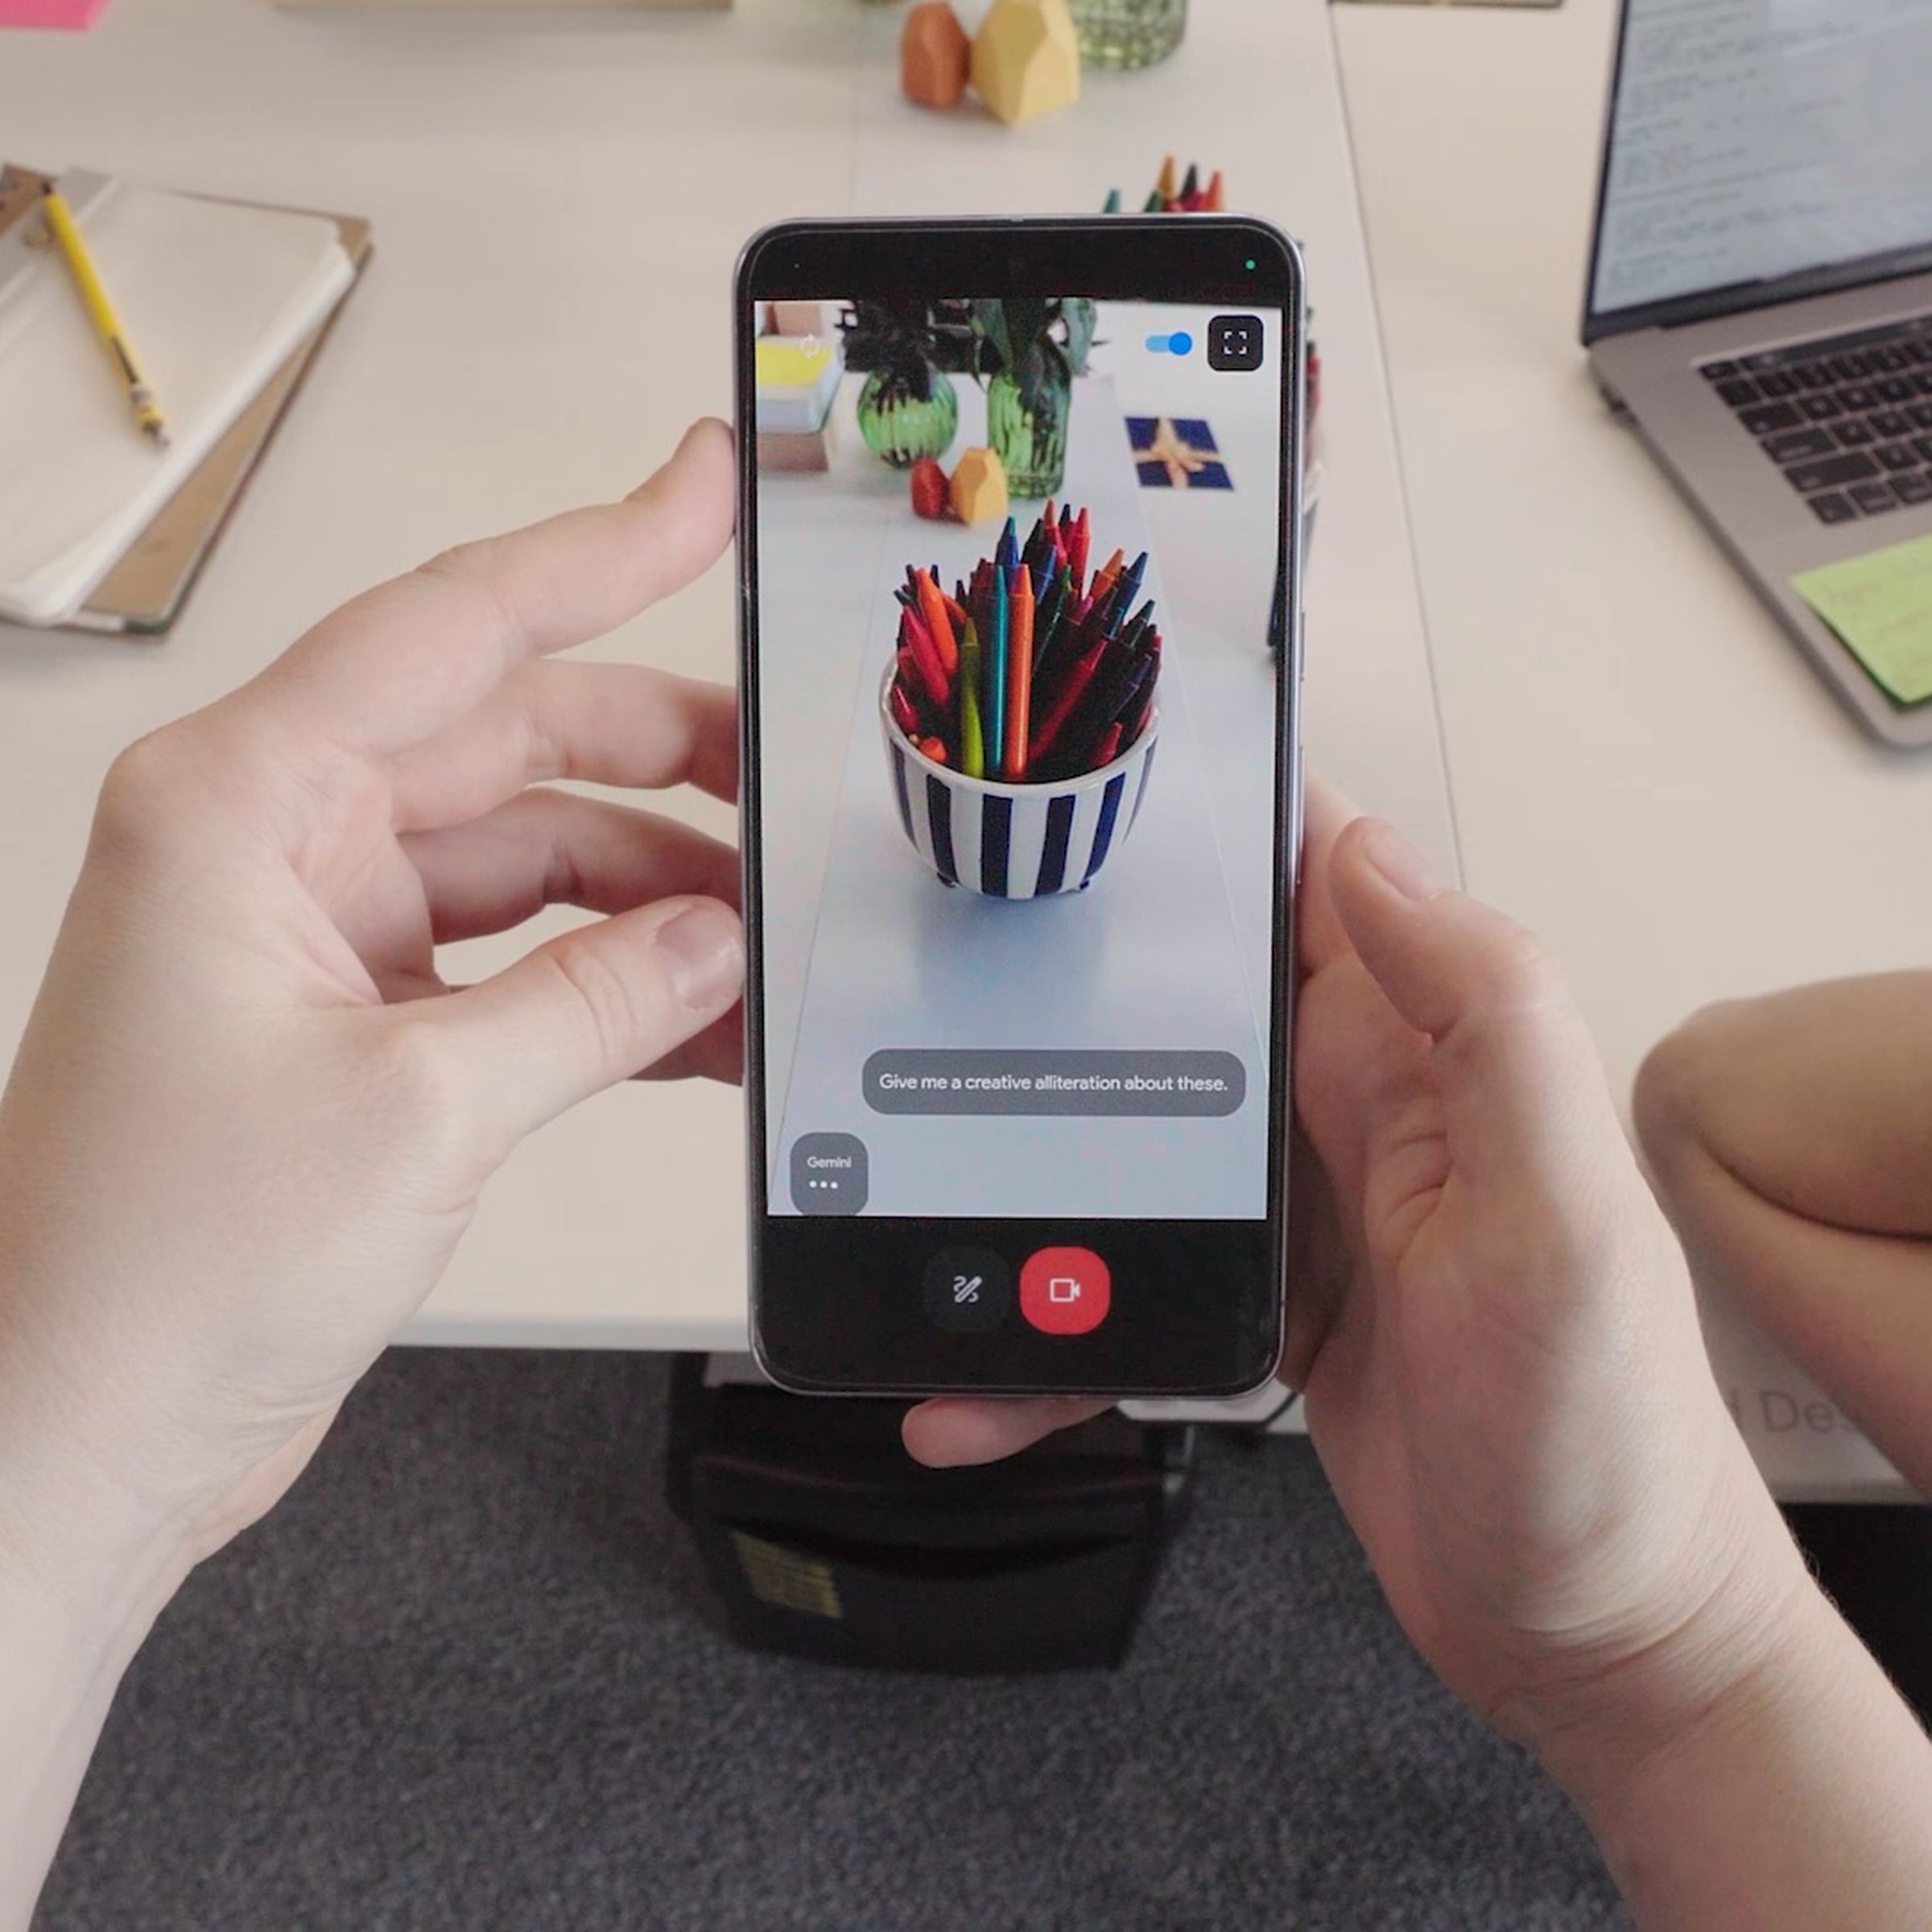 A still from a video showing a phone identifying a bowl of markers.